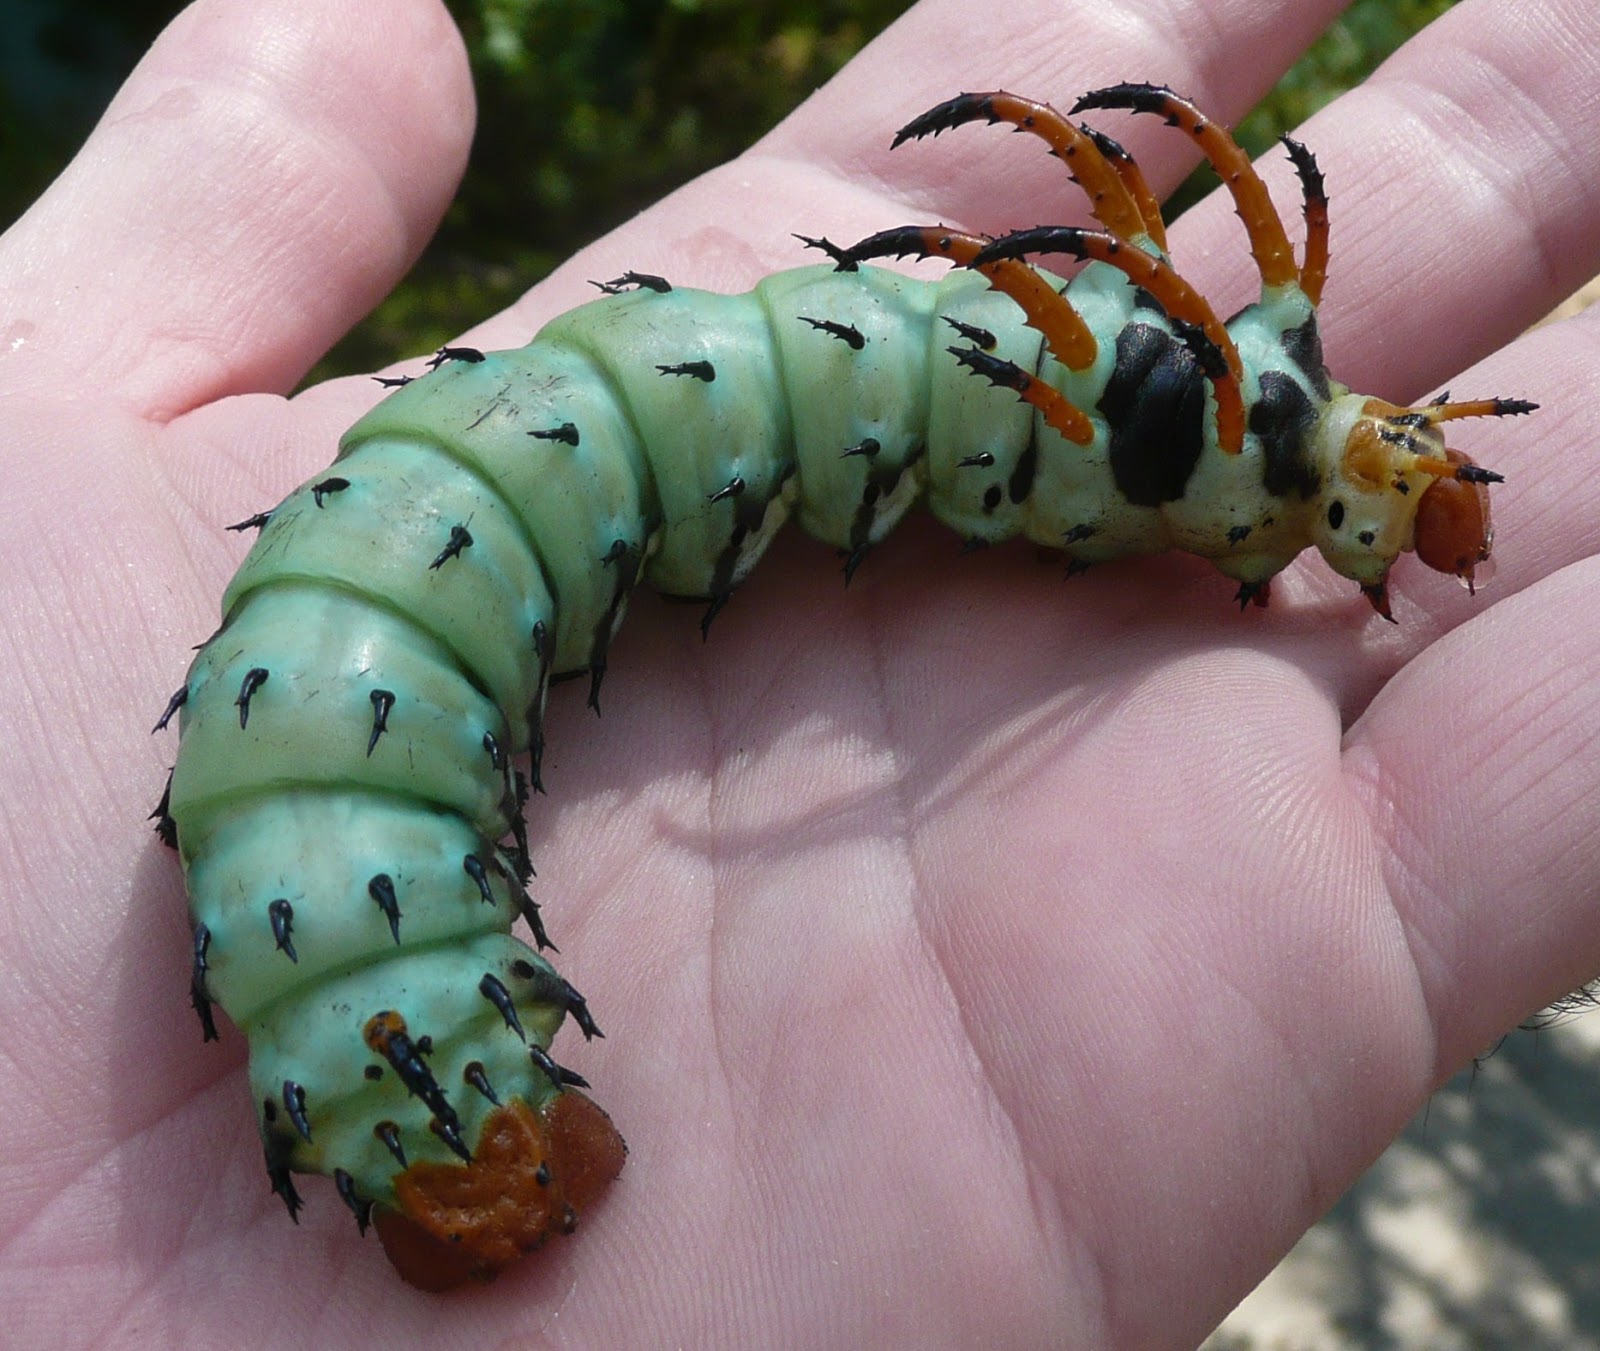 LatinLutheran: The Resurrection of the Hickory Horned Devils